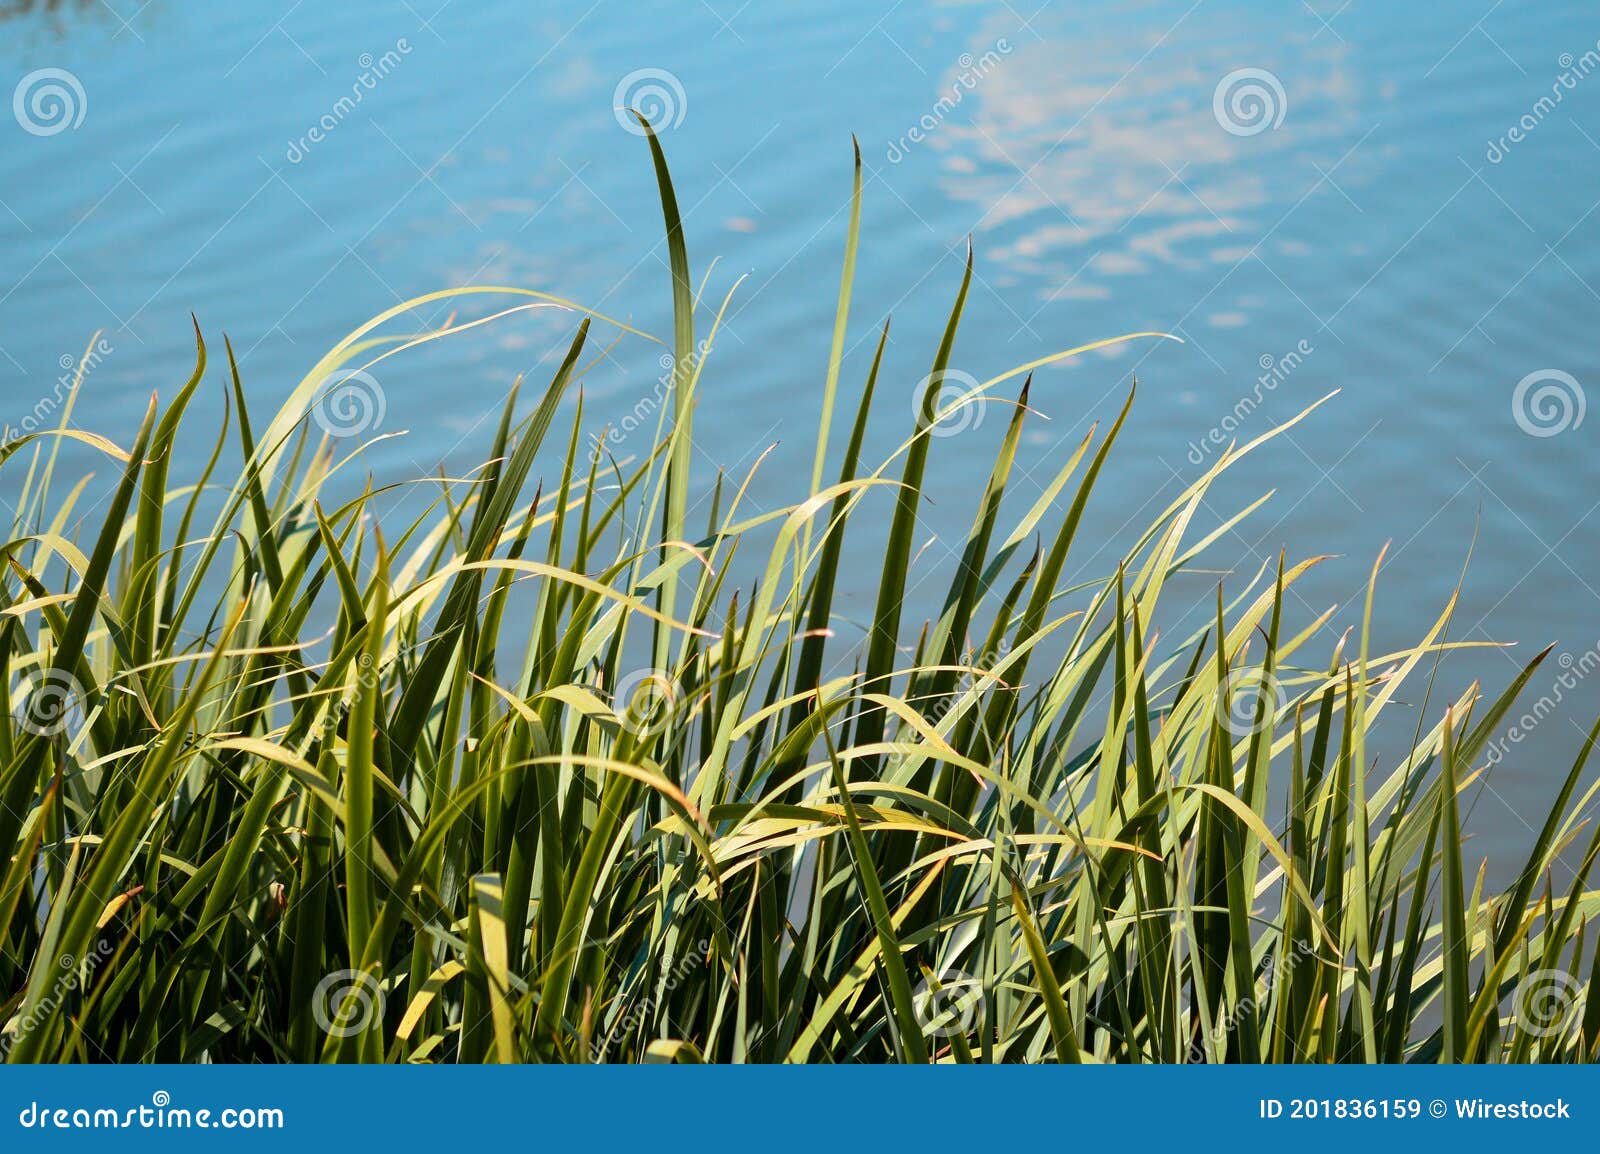 Shot Of Grass And Leaves On The Tranquil Waterscape Background, Texture